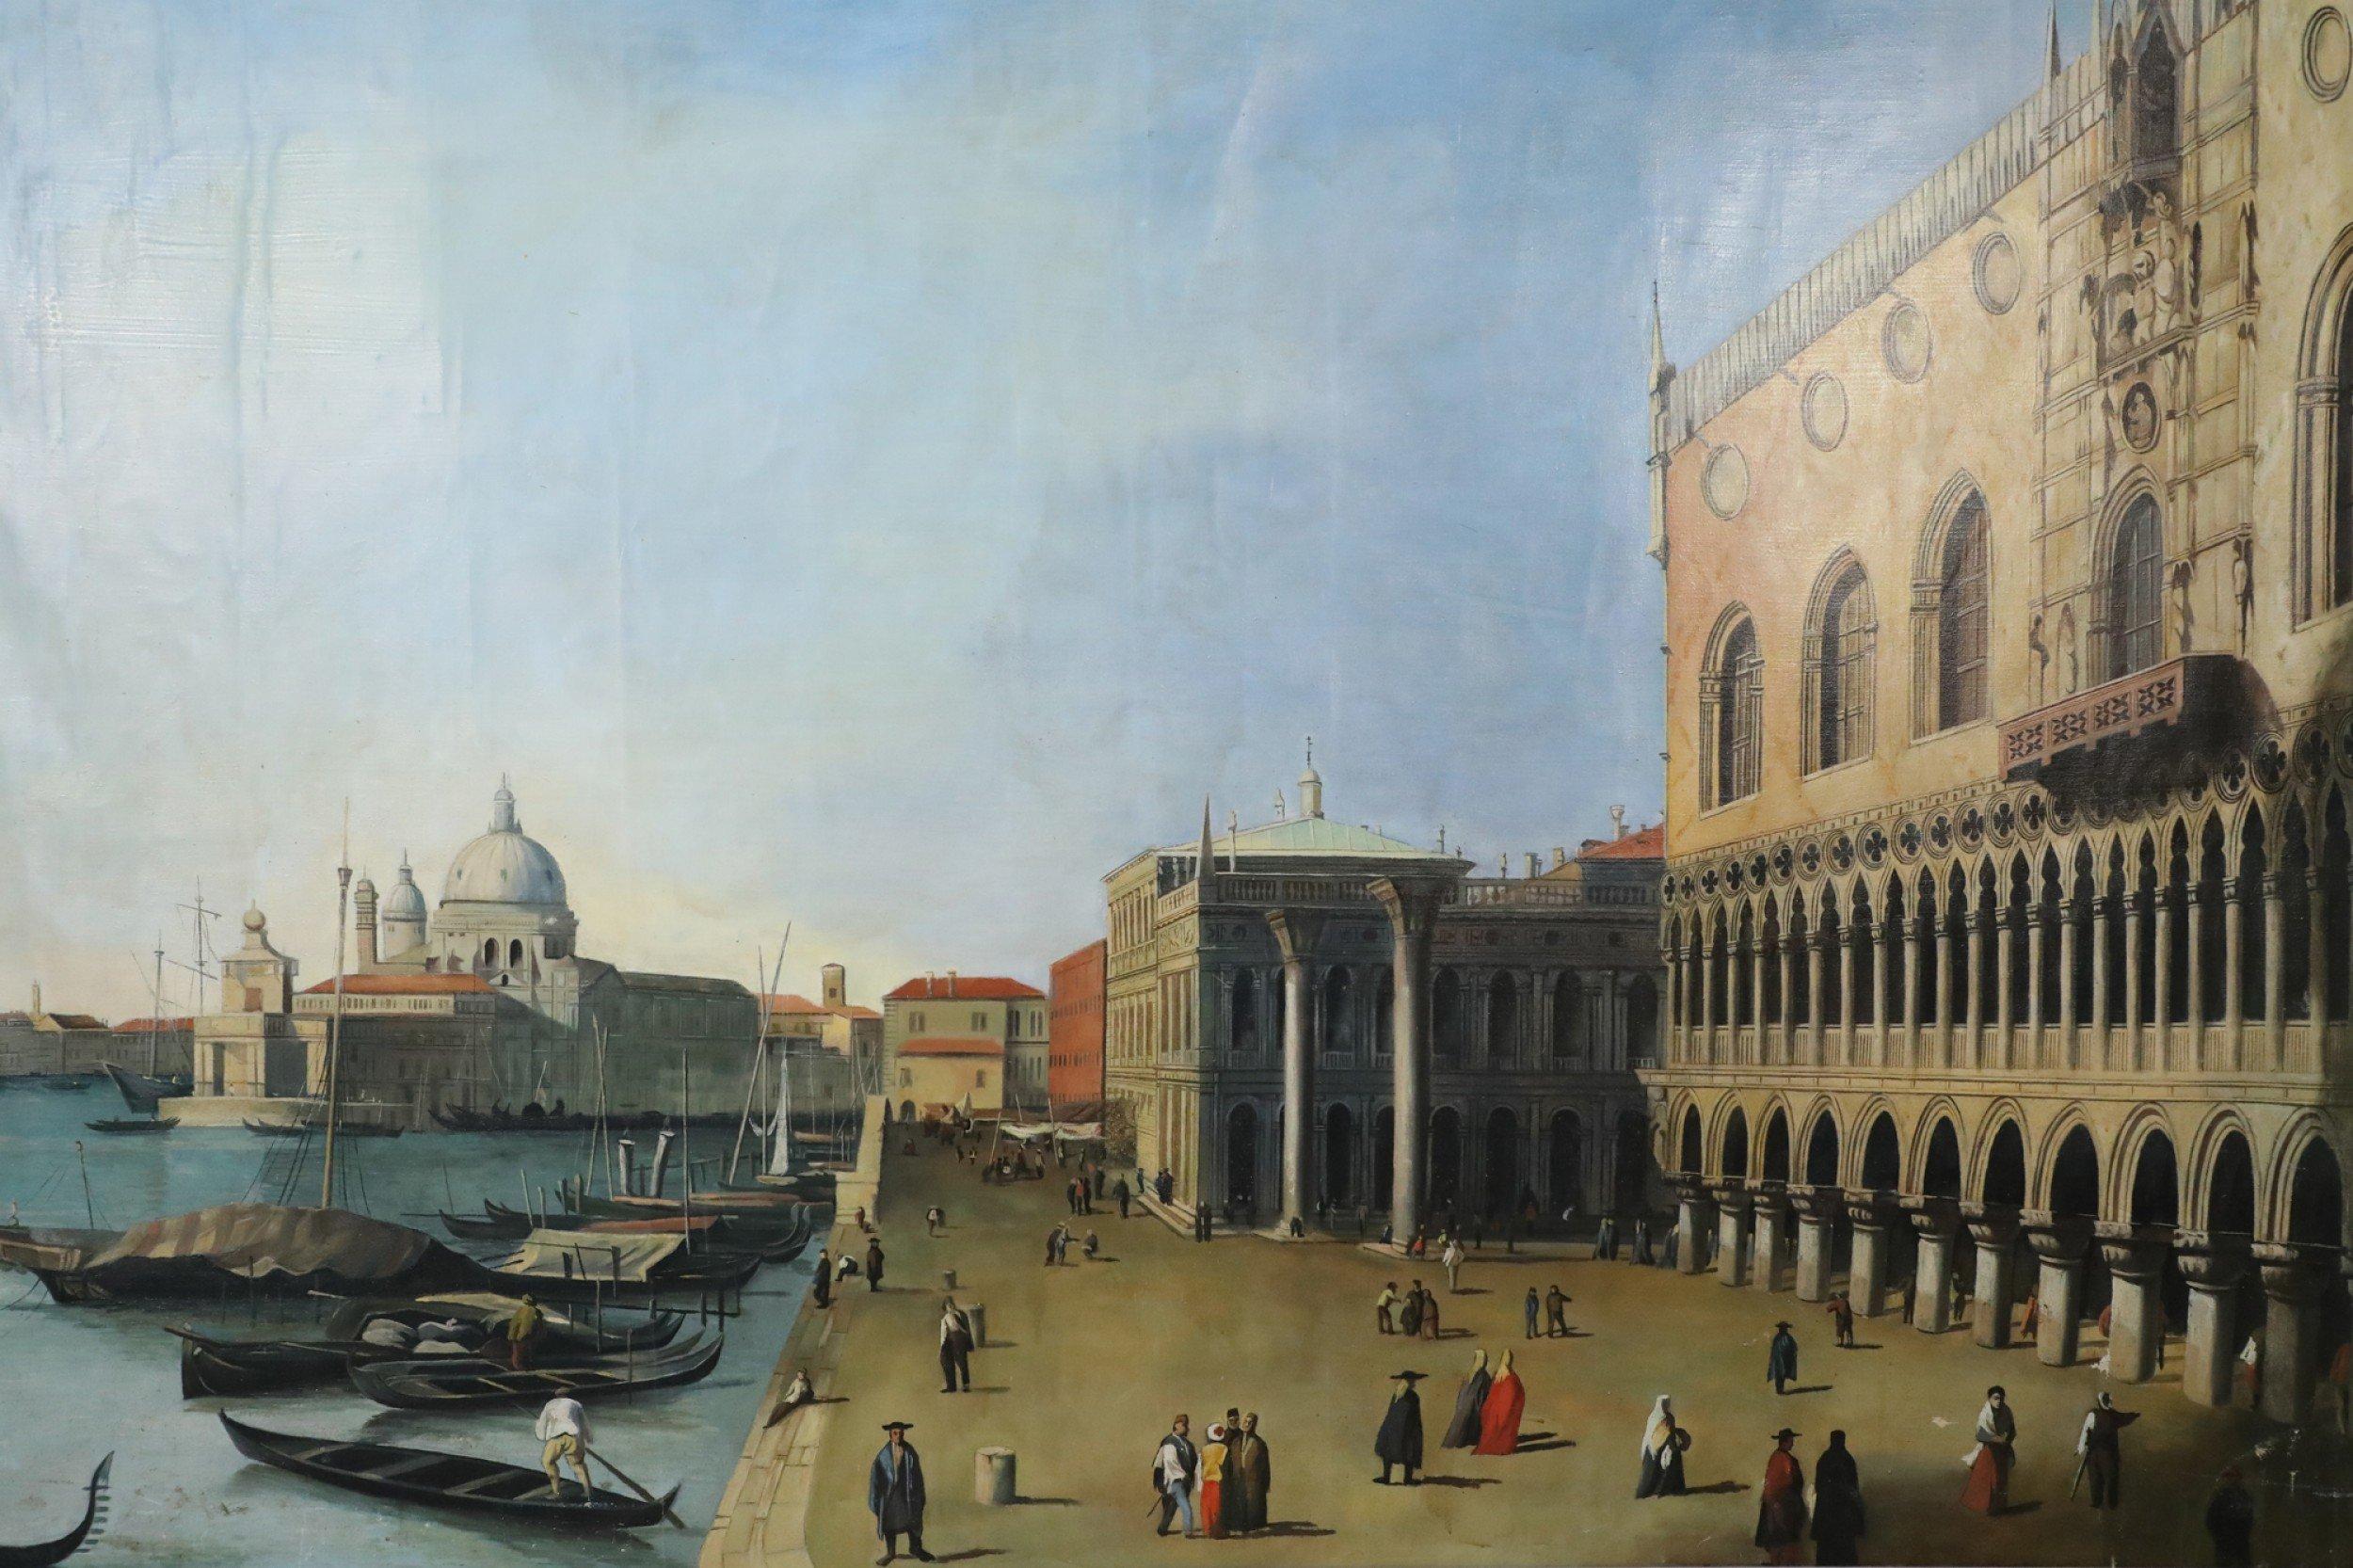 Vintage Venetian-style (20th century) painting capturing the 14th century gothic architecture of the famed Doge Palace from the side, while figures move throughout, gondolas are moored along the canal's edge, and the domes of Punta della Dogana are